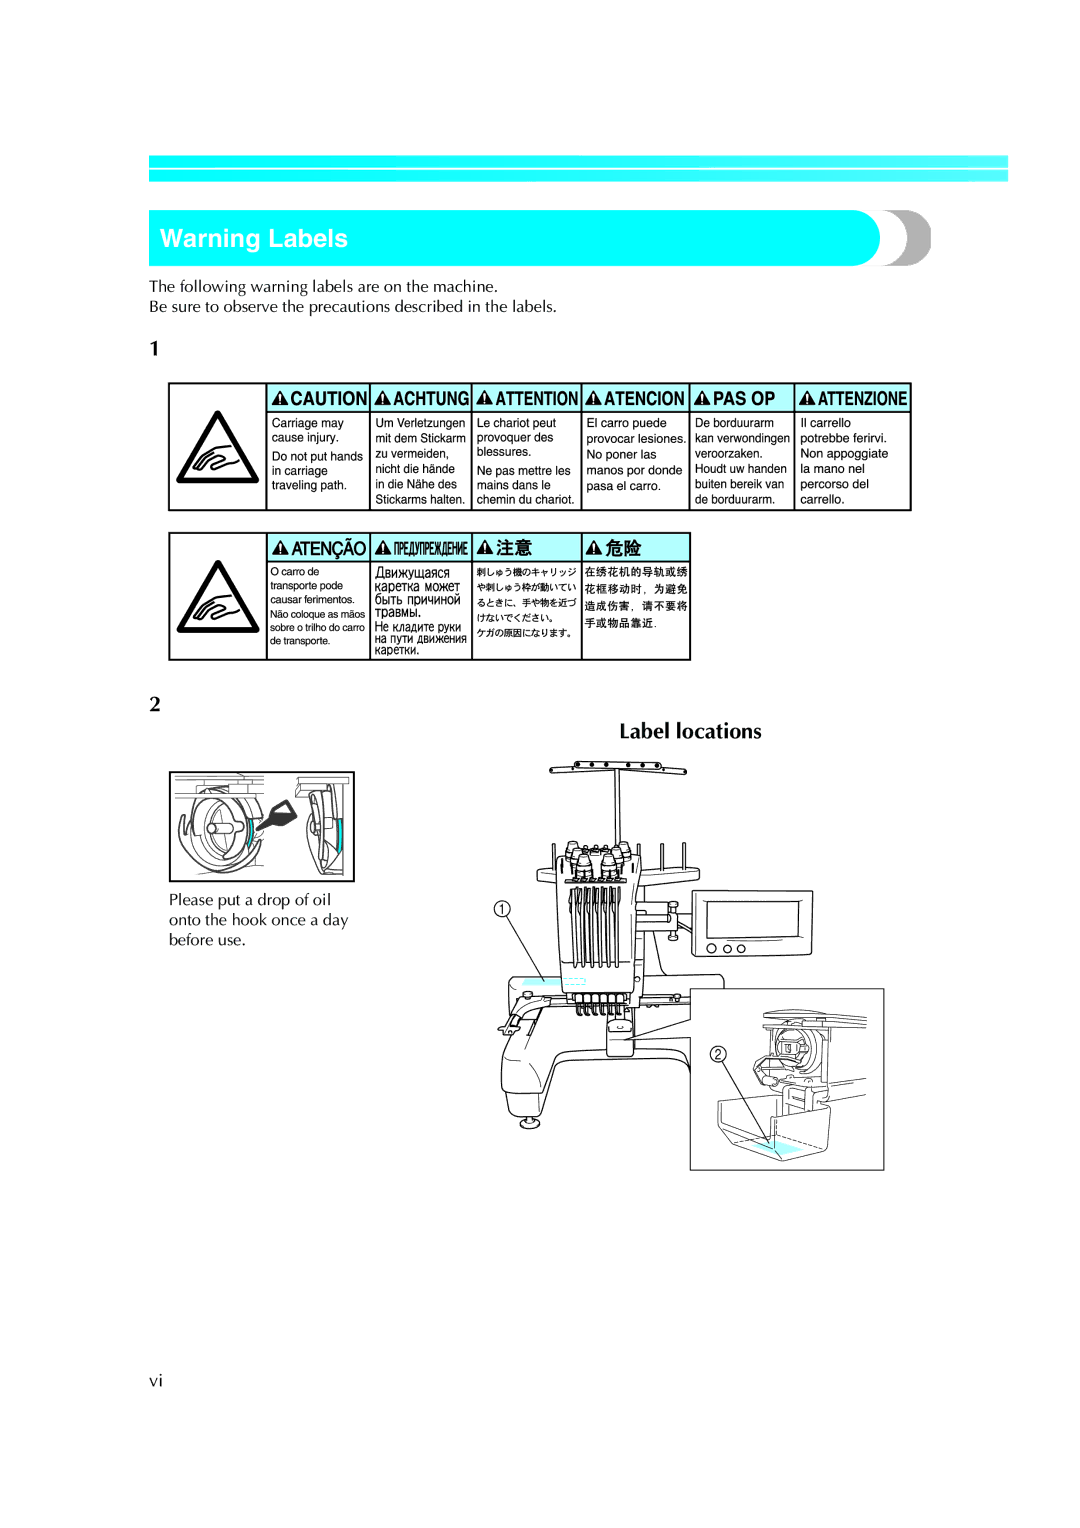 Brother PR-620 operation manual Label locations 